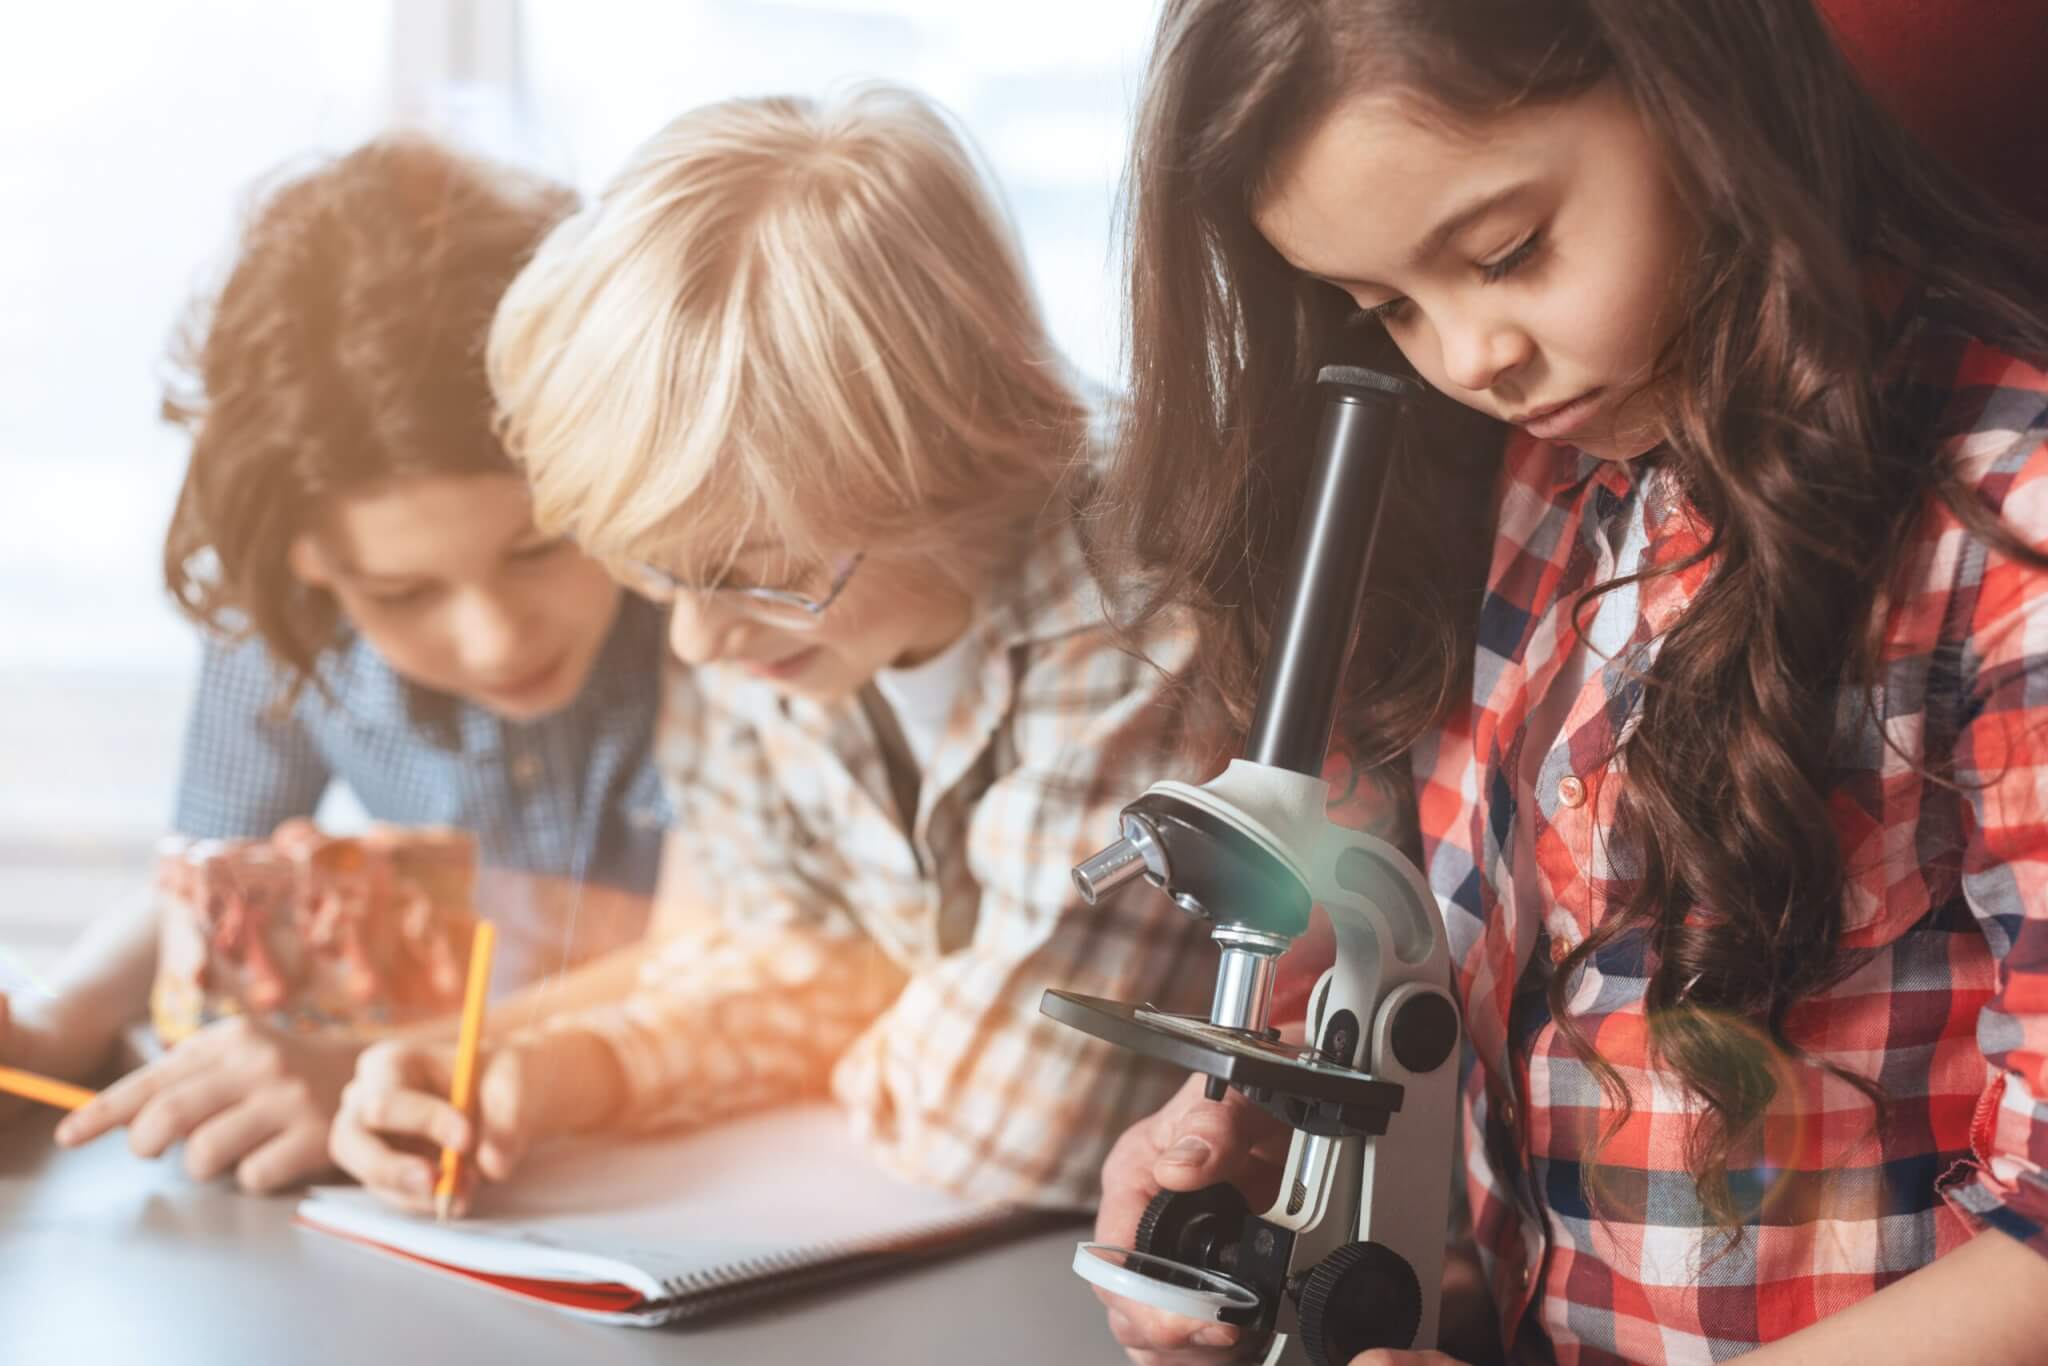 Best STEM Projects For Kids: Top 5 Activities Most Recommended By Experts